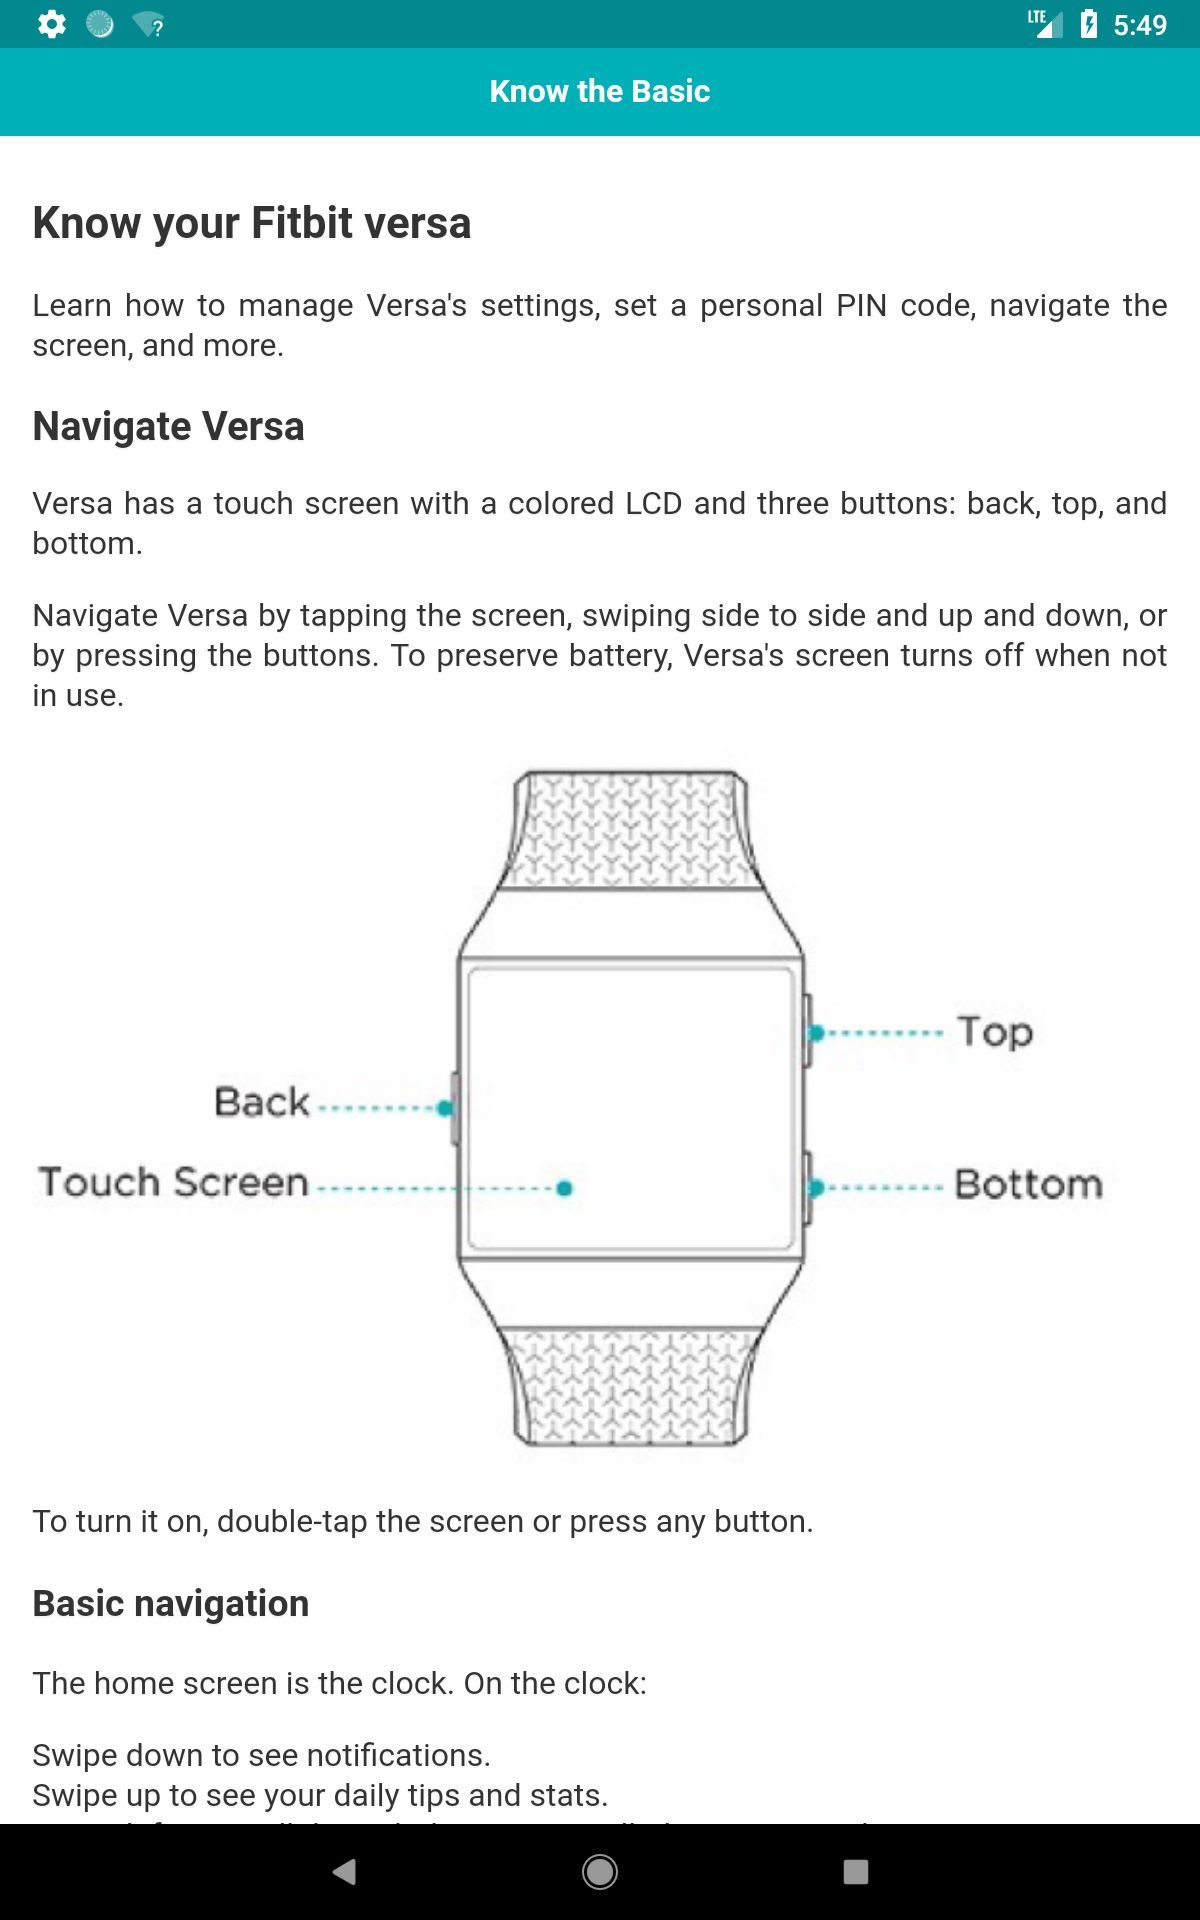 User guide for Fitbit Versa